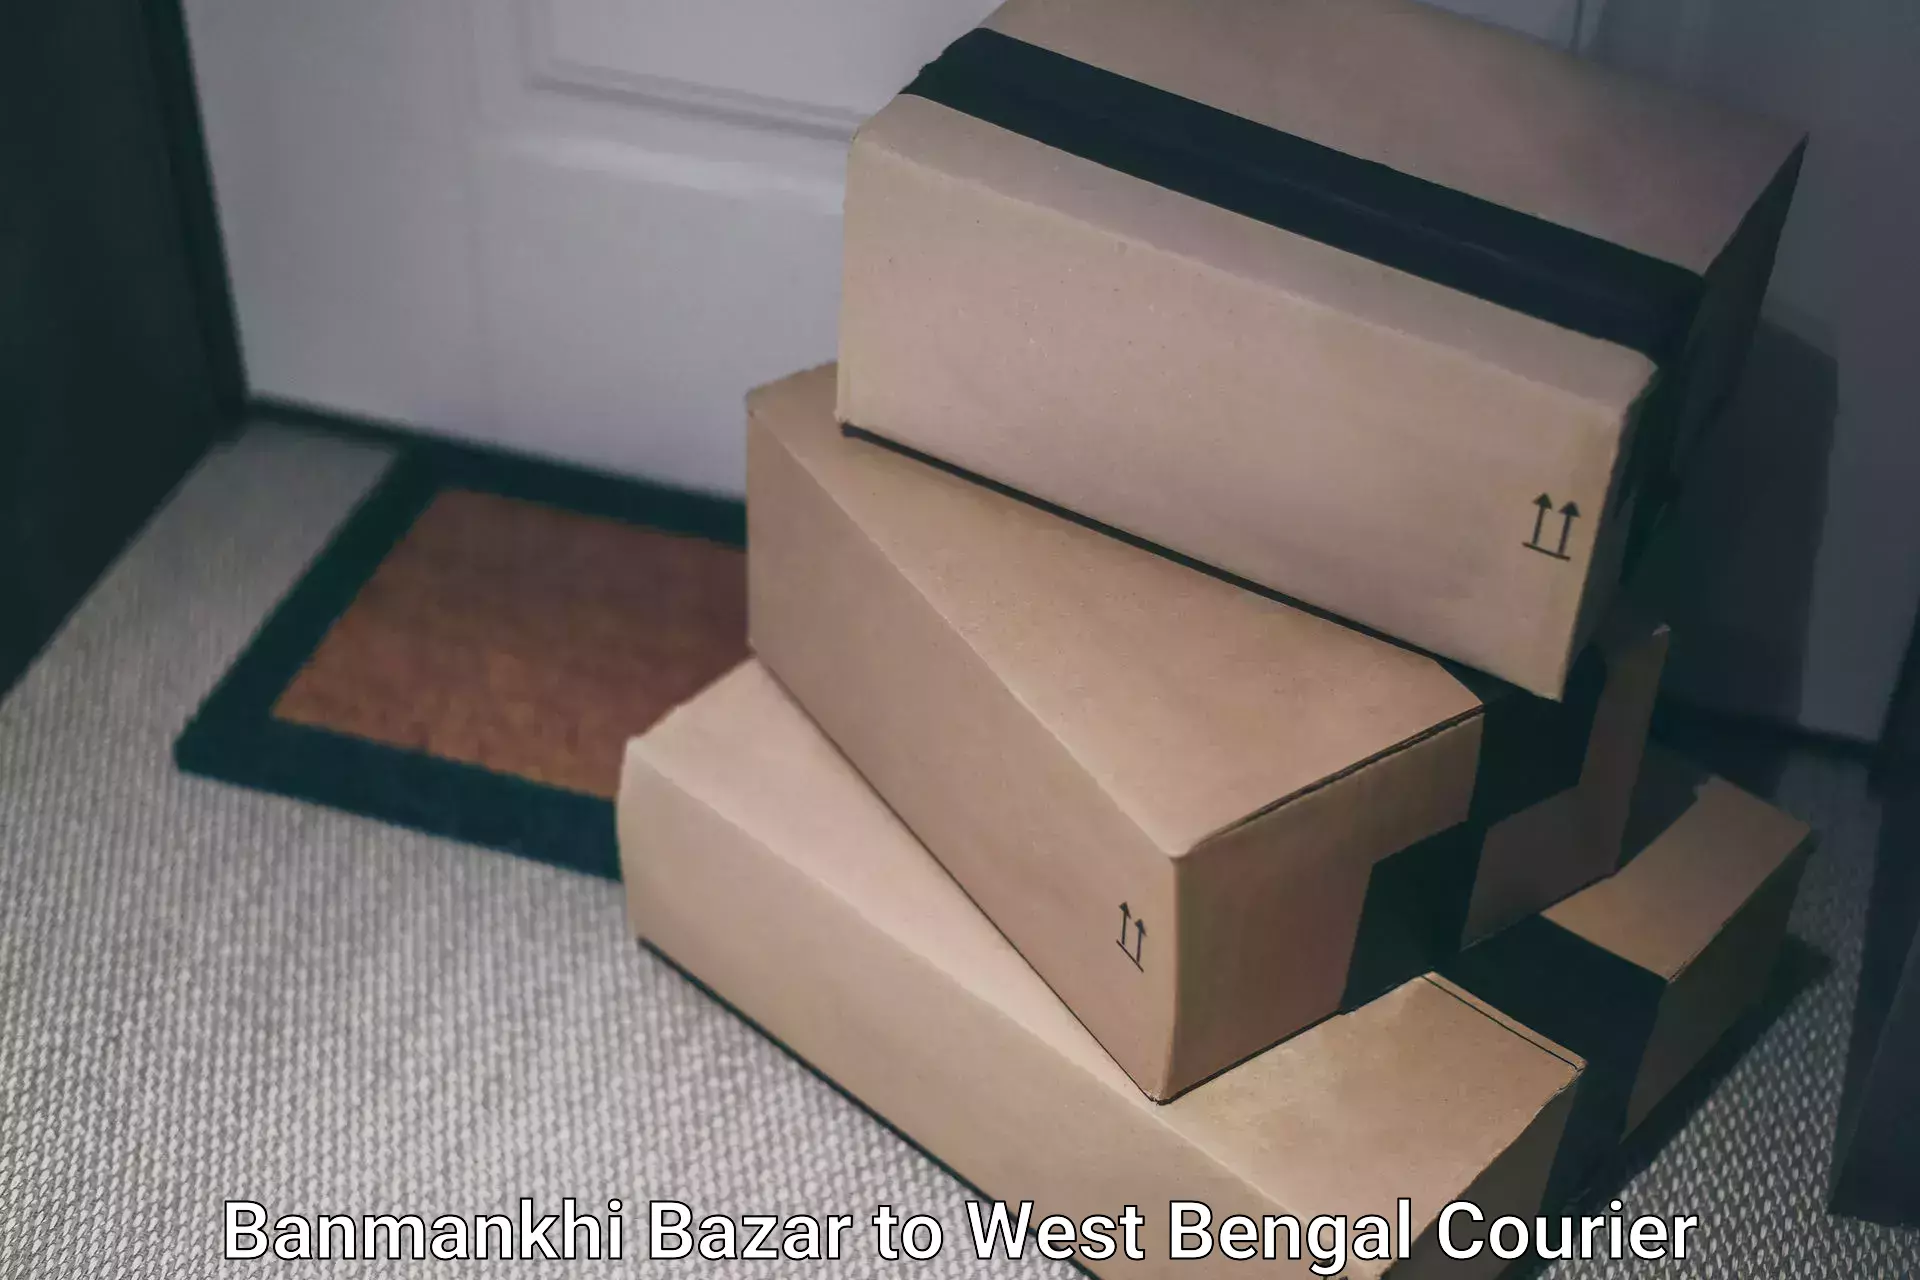 24-hour courier service Banmankhi Bazar to West Bengal